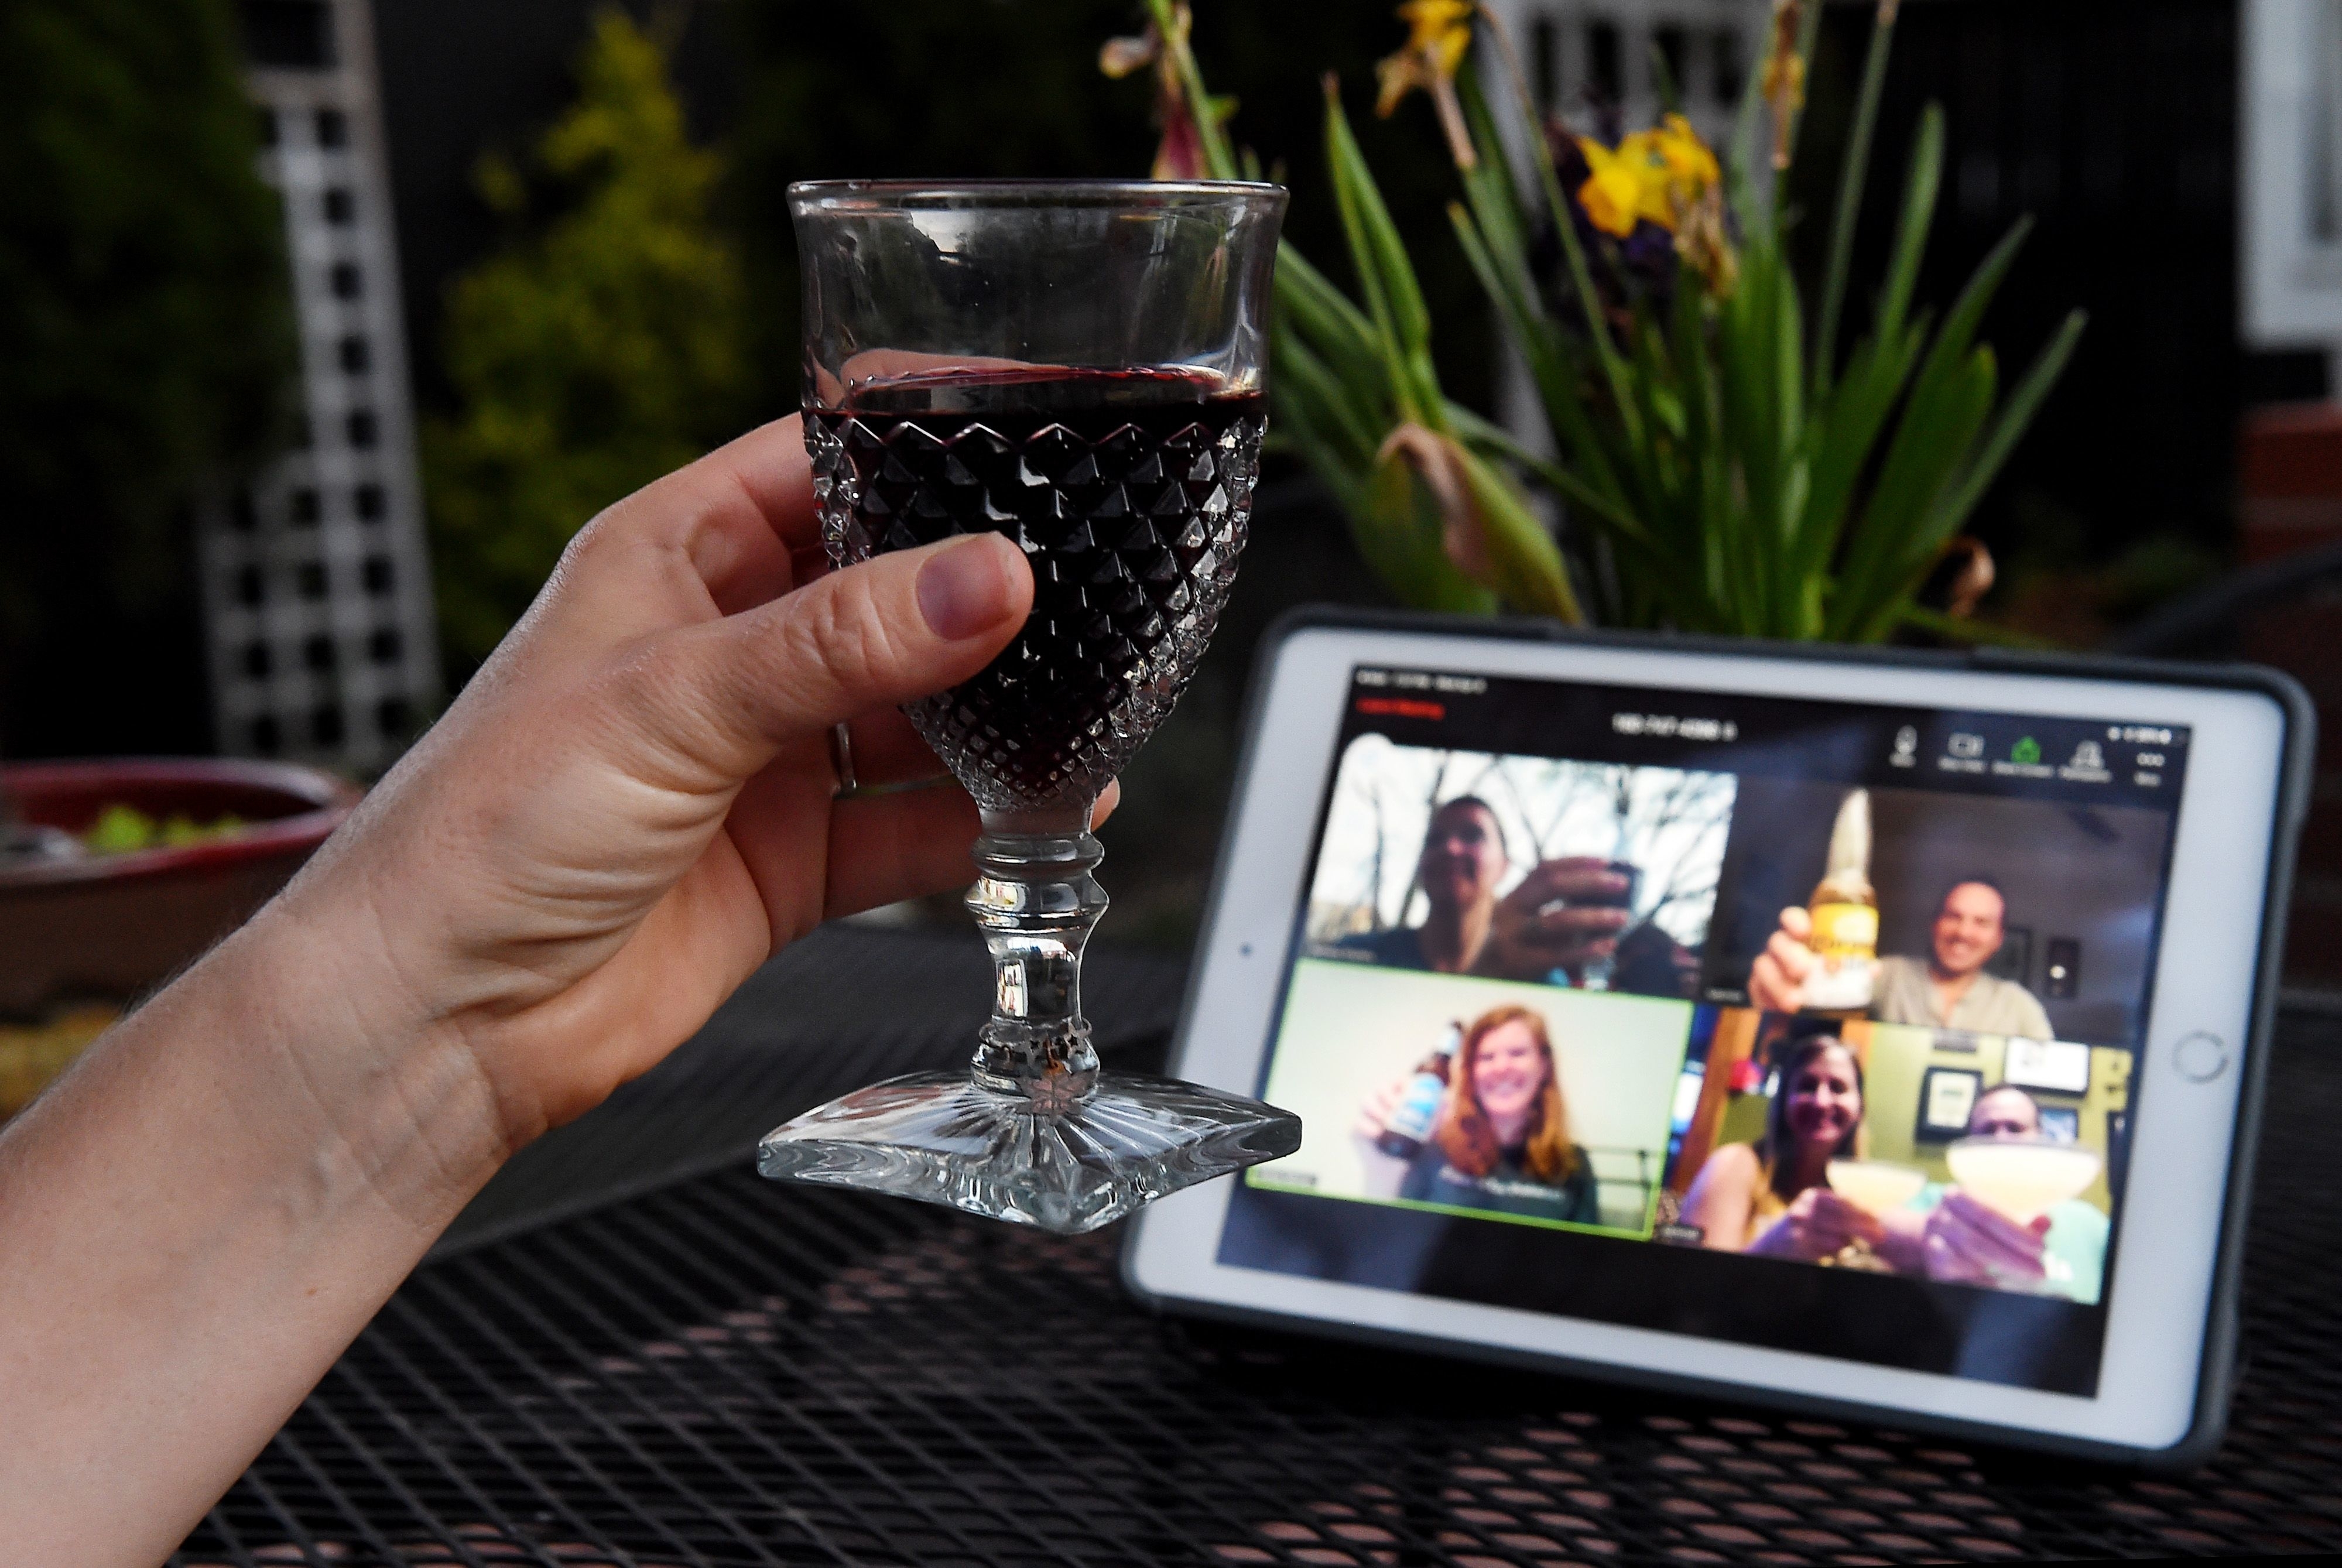 Person raising a glass in a virtual toast with friends on a tablet screen